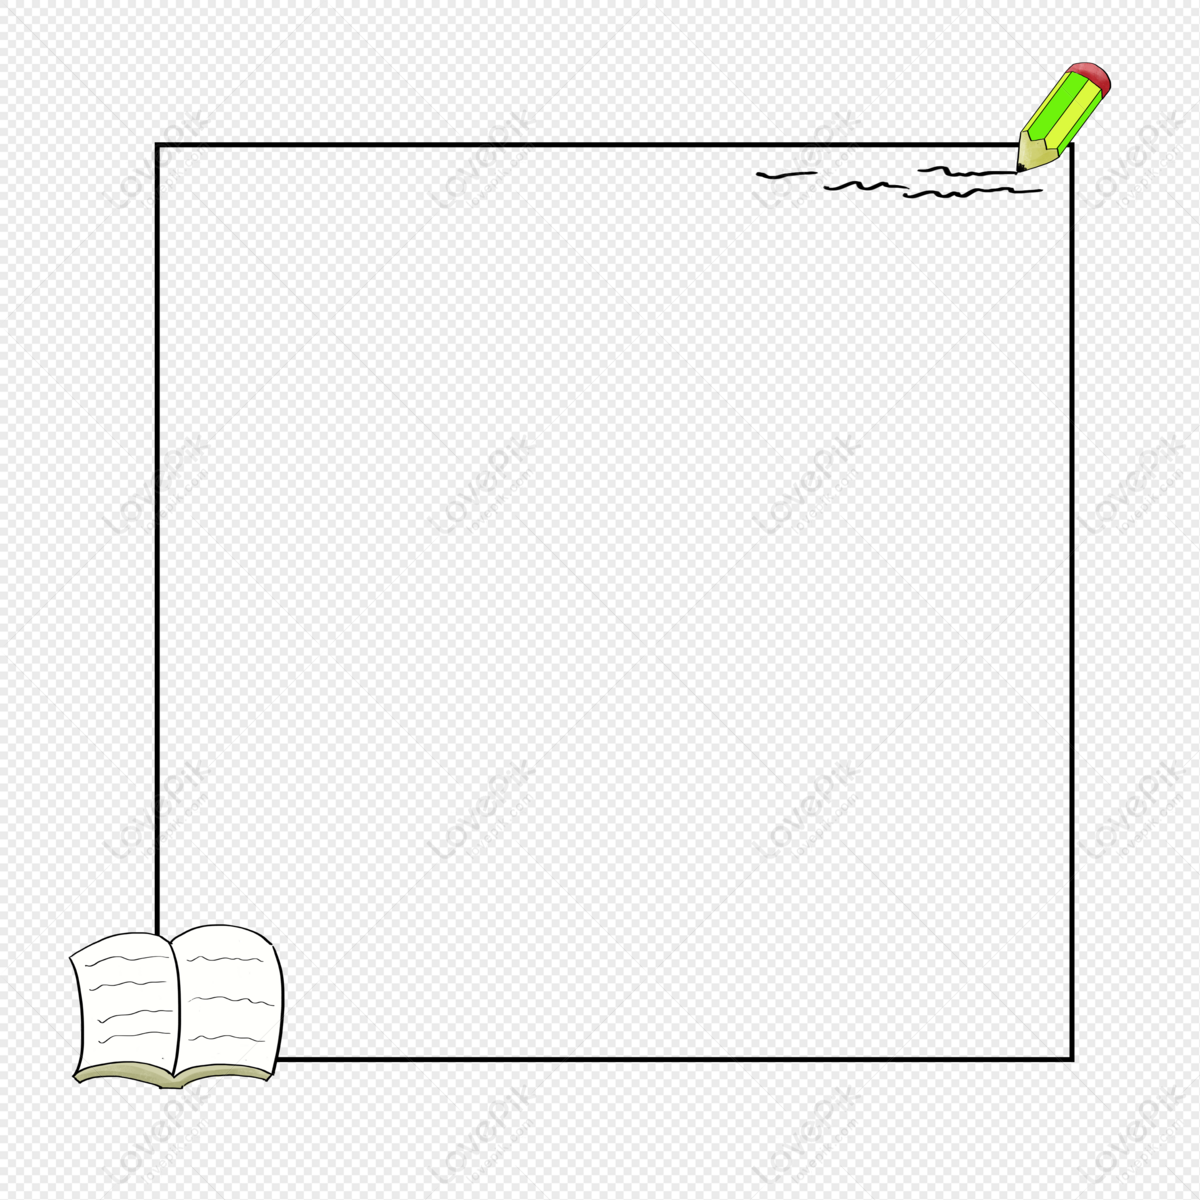 Hand-painted book pencil border png free material, material, book, free materials png transparent background